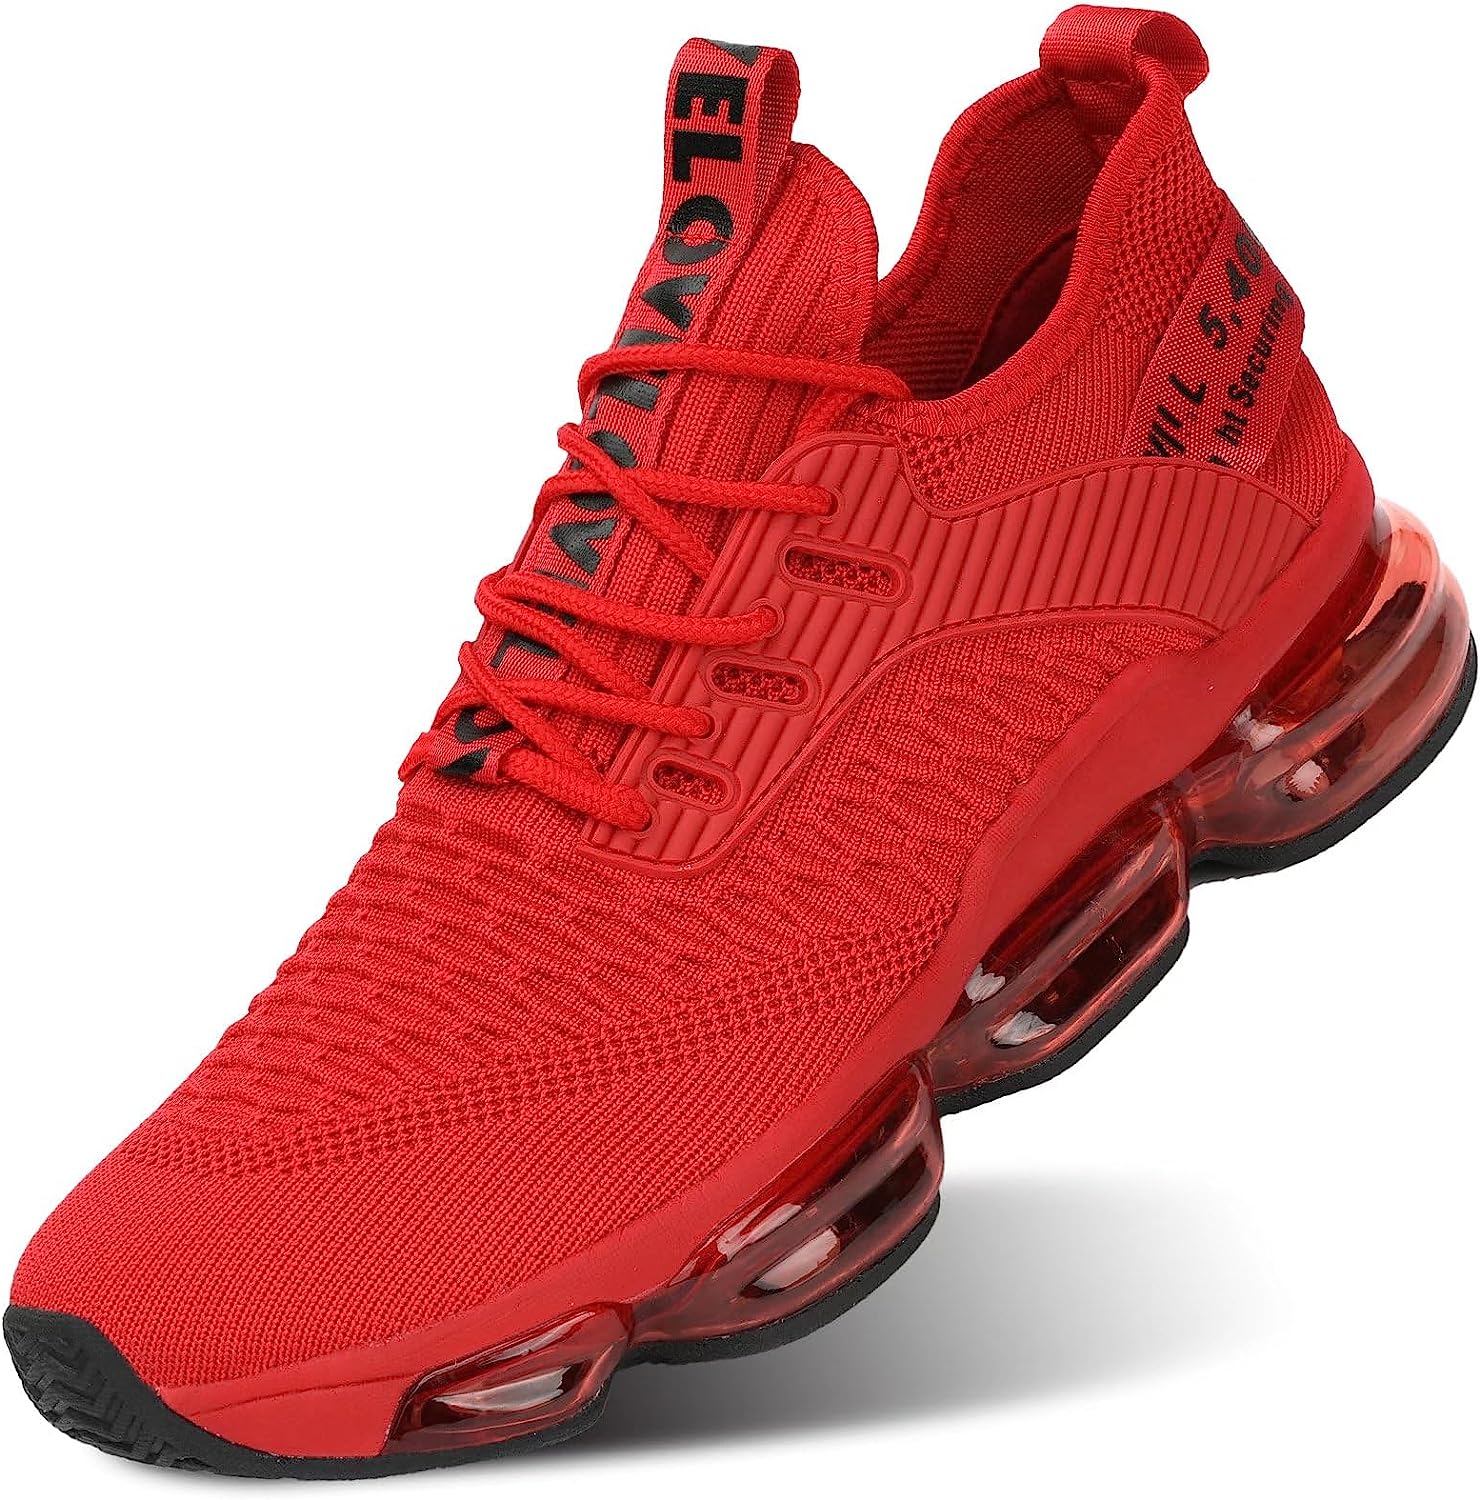 Men's Air Running Shoes Breathable Tennis Basketball [...]